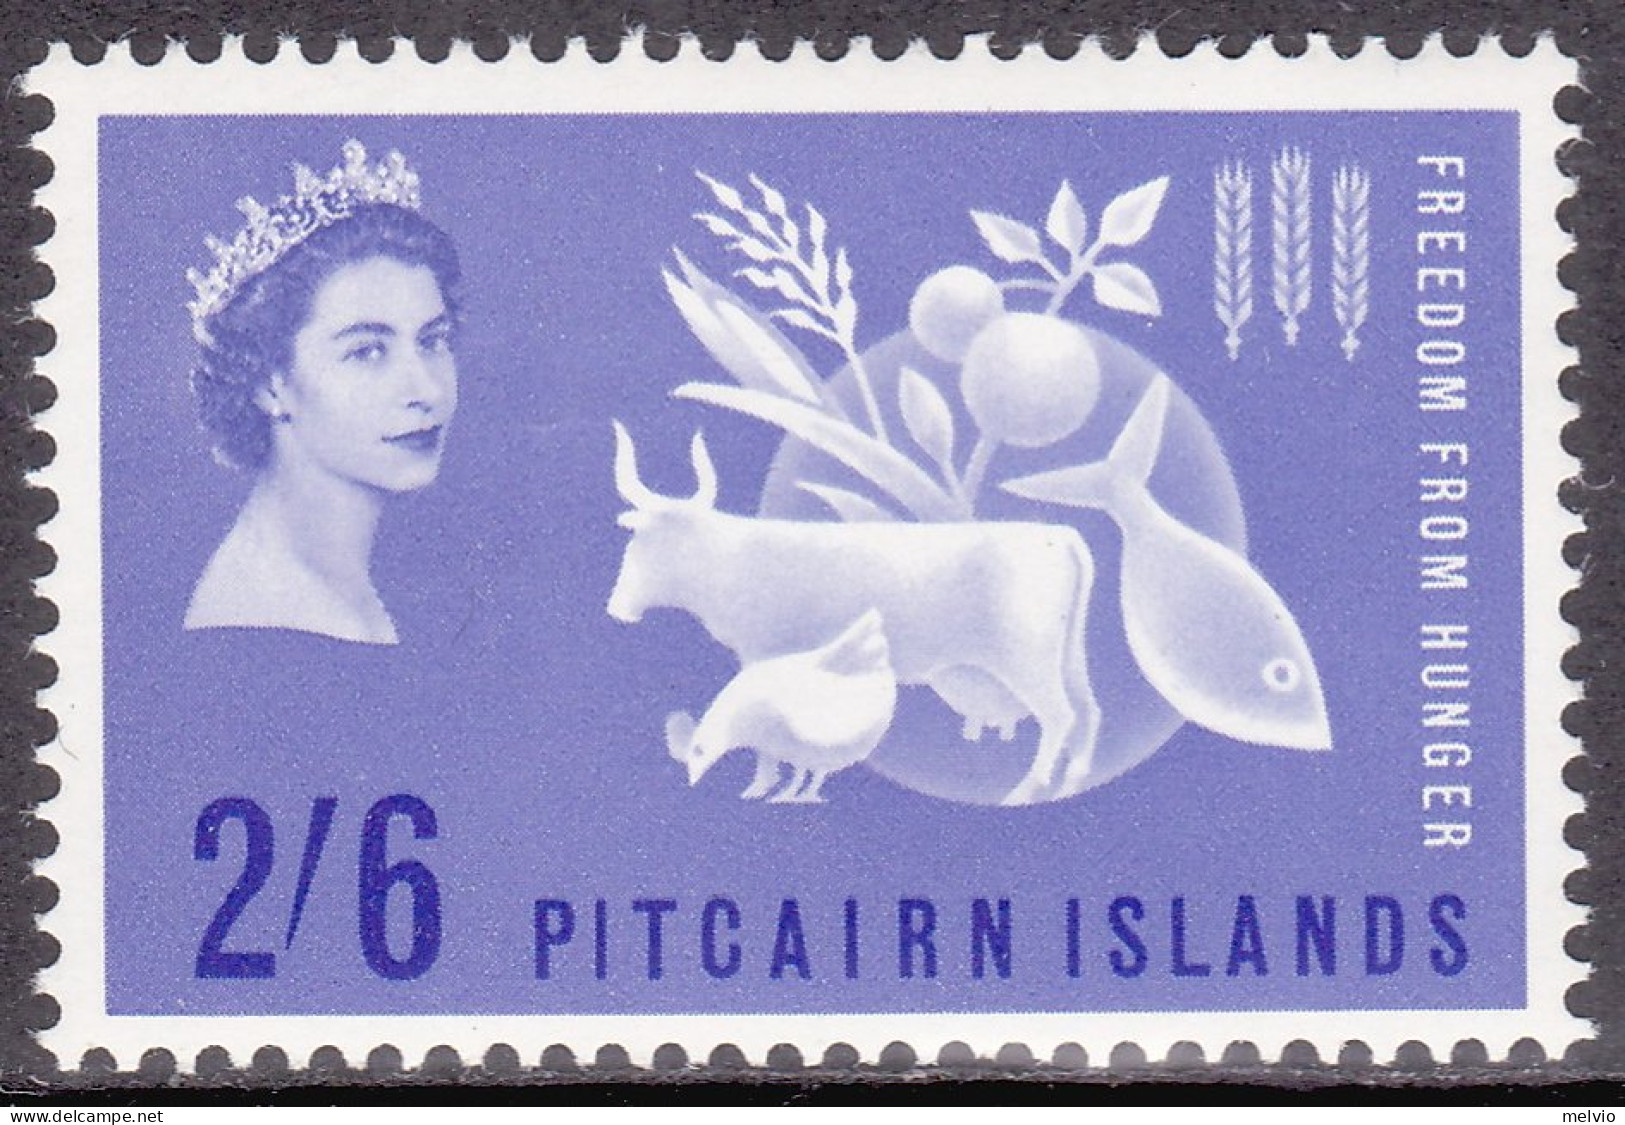 1963-Pitcairn Isole (MNH=**) S.1v."Campagna Contro La Fame" - Pitcairneilanden